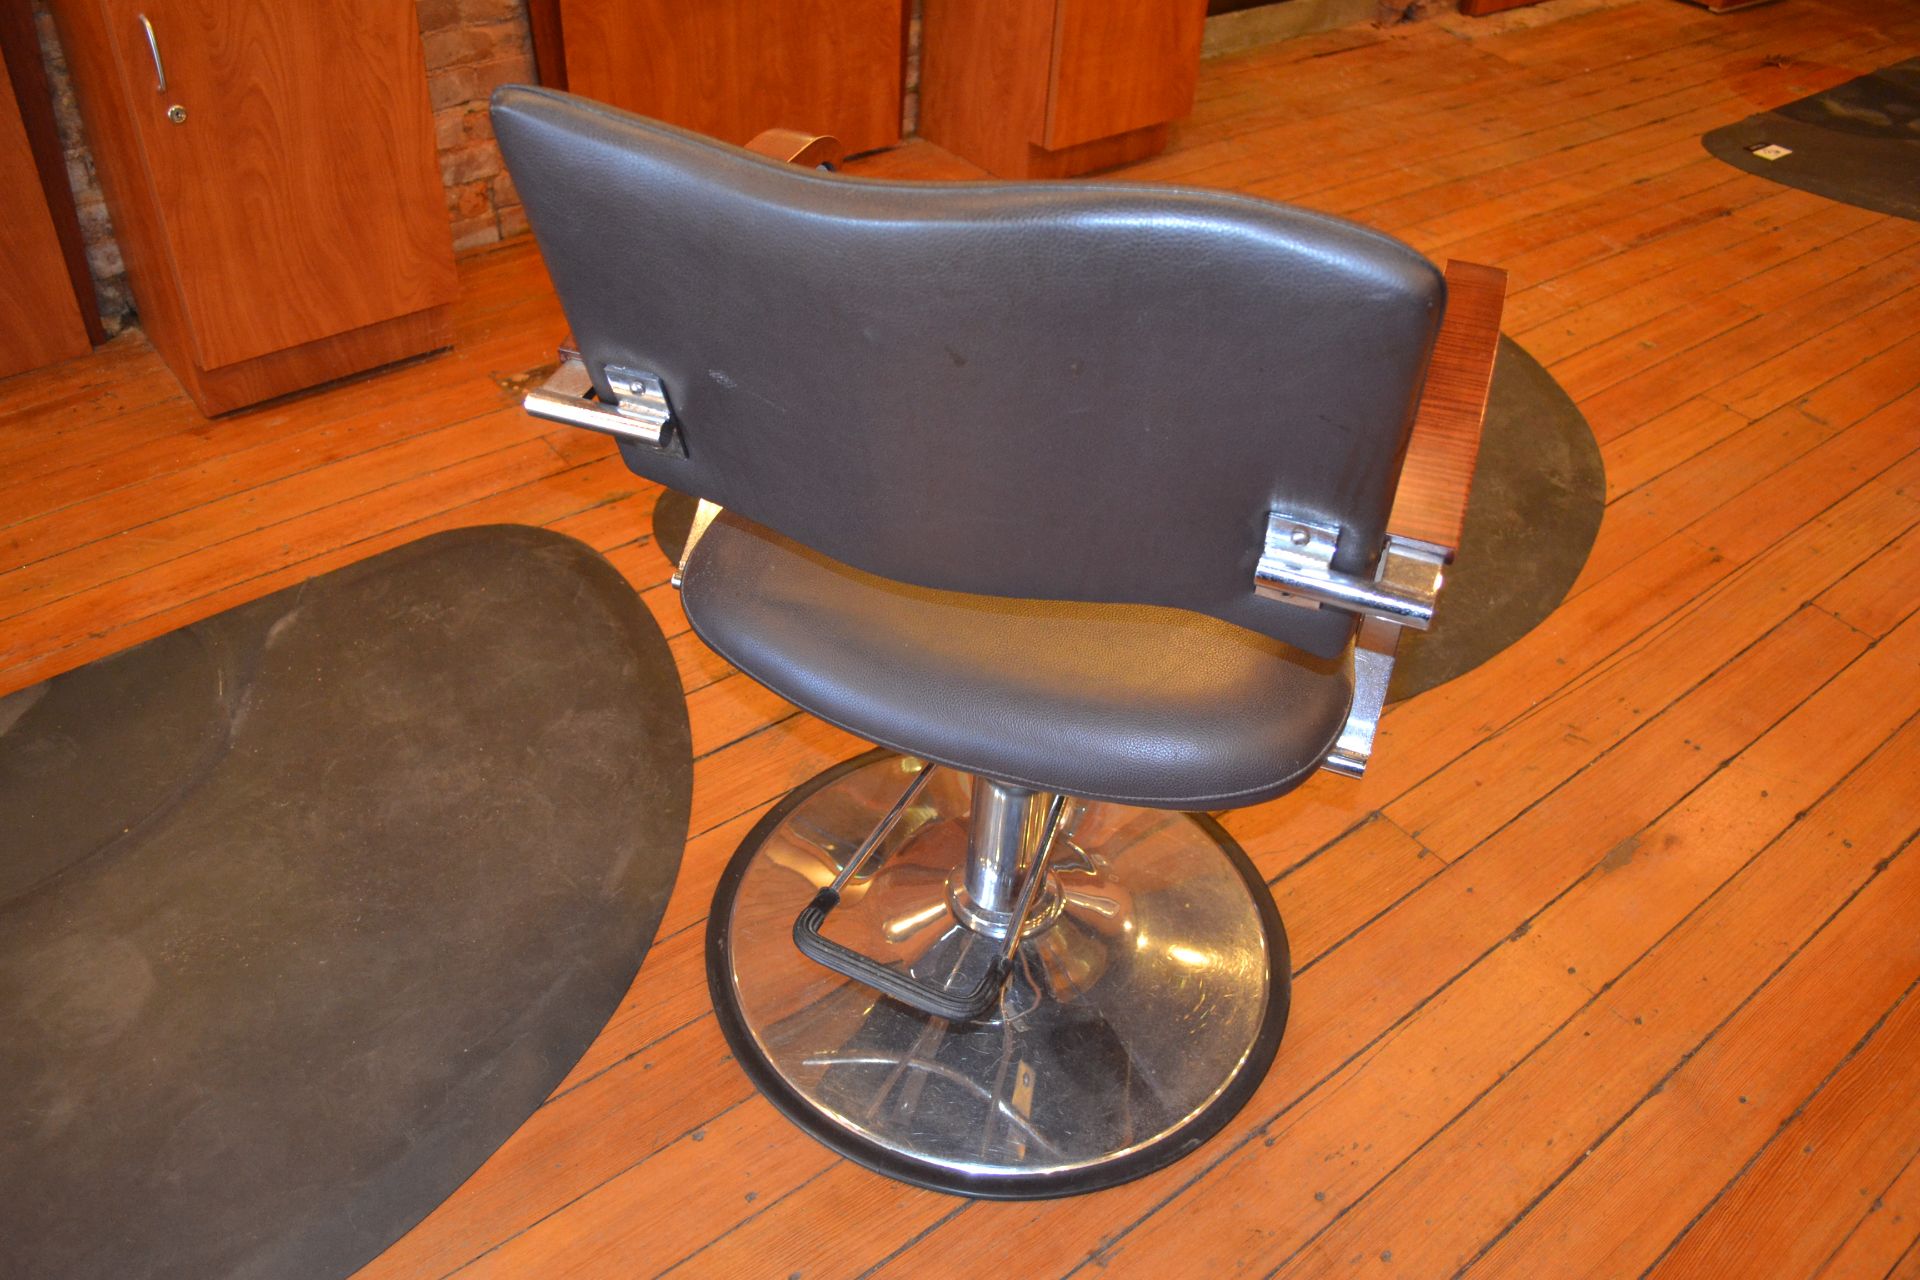 Formatron Wave, Hydraulic Styling Chair - Image 3 of 4